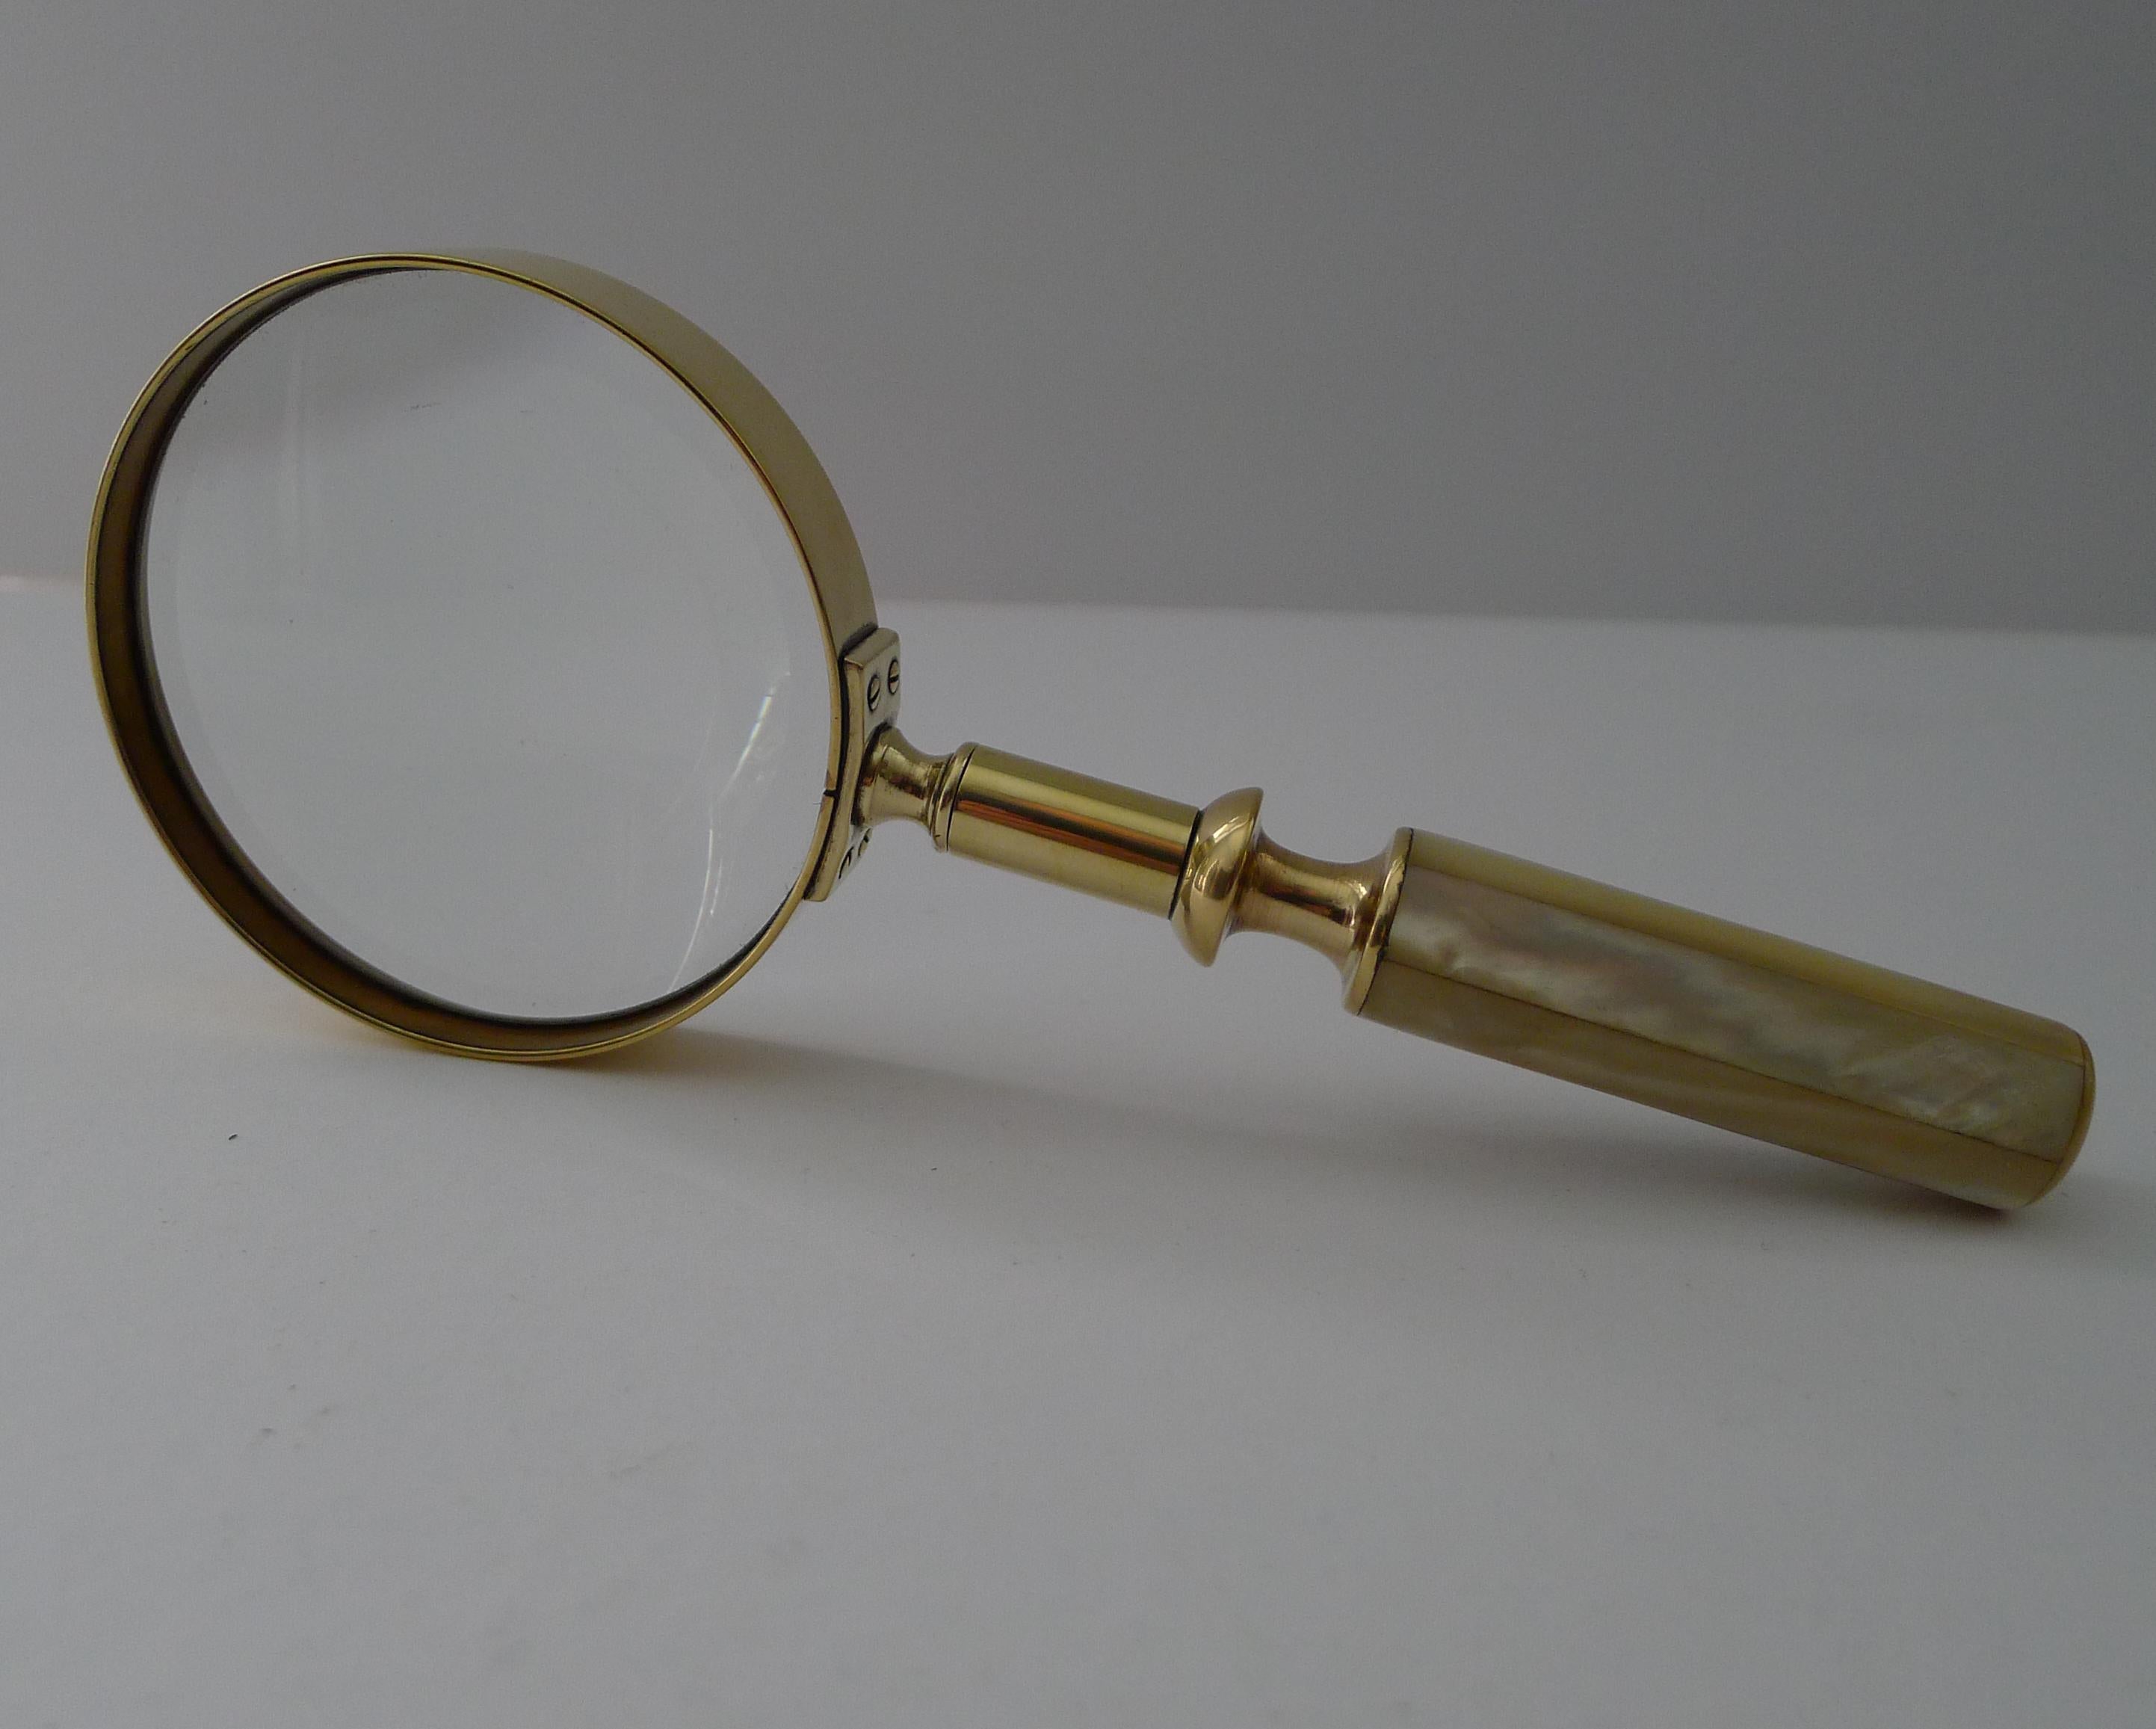 A fabulous and very usable late Victorian magnifying glass made from solid English brass with a quality screwed construction and the handle decorated with Mother of Pearl or Nacre shell with it's iridescent qualities.

Excellent condition with a